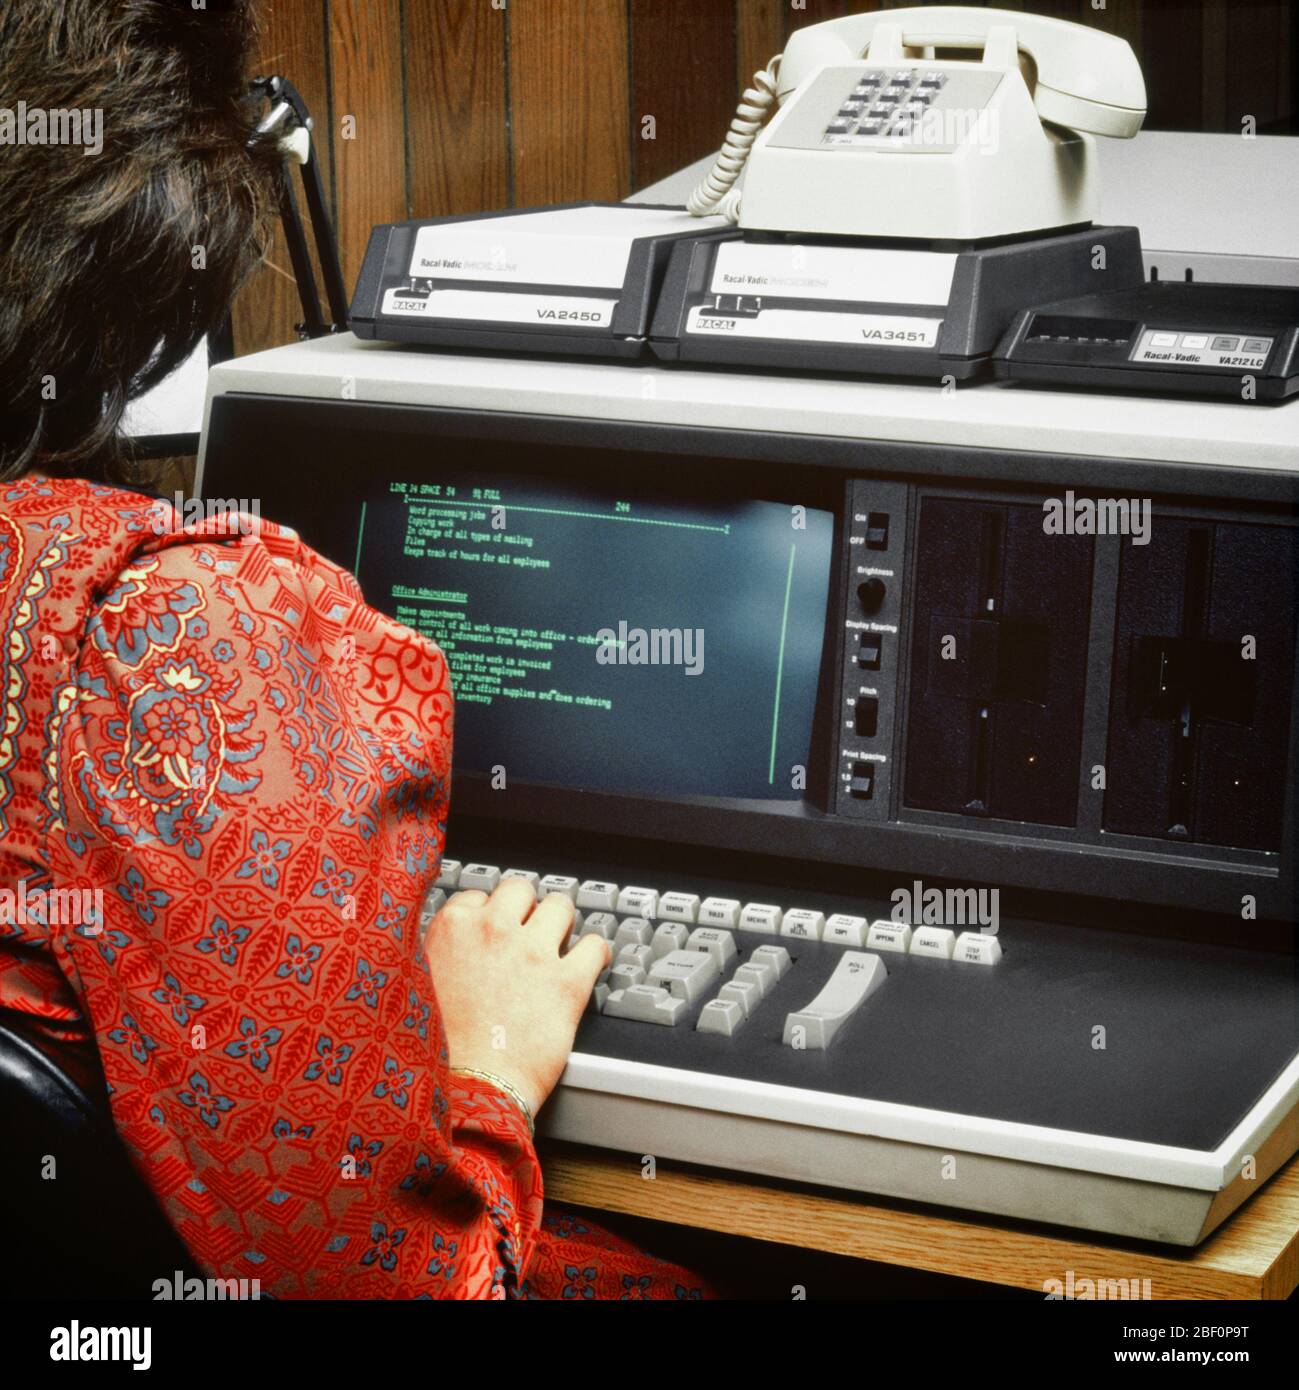 1980s BACK OF ANONYMOUS WOMAN WEARING RED PAISLEY DRESS WORKING ON EARLY COMPUTER TERMINAL KEYBOARD WITH DIAL-UP TELEPHONE MODEM - ko1556 PHT001 HARS FEMALES JOBS UNITED STATES COPY SPACE LADIES PERSONS UNITED STATES OF AMERICA NORTH AMERICA NORTH AMERICAN SKILL OCCUPATION SKILLS HEAD AND SHOULDERS EARLY PAISLEY REAR VIEW OF ON OPPORTUNITY EMPLOYMENT OCCUPATIONS HIGH TECH DATA ENTRY HARDWARE MONITOR ANONYMOUS EMPLOYEE BACK VIEW DIAL-UP HIGH-TECH MODEM PROGRAMMER TERMINAL YOUNG ADULT WOMAN CAUCASIAN ETHNICITY OLD FASHIONED Stock Photo